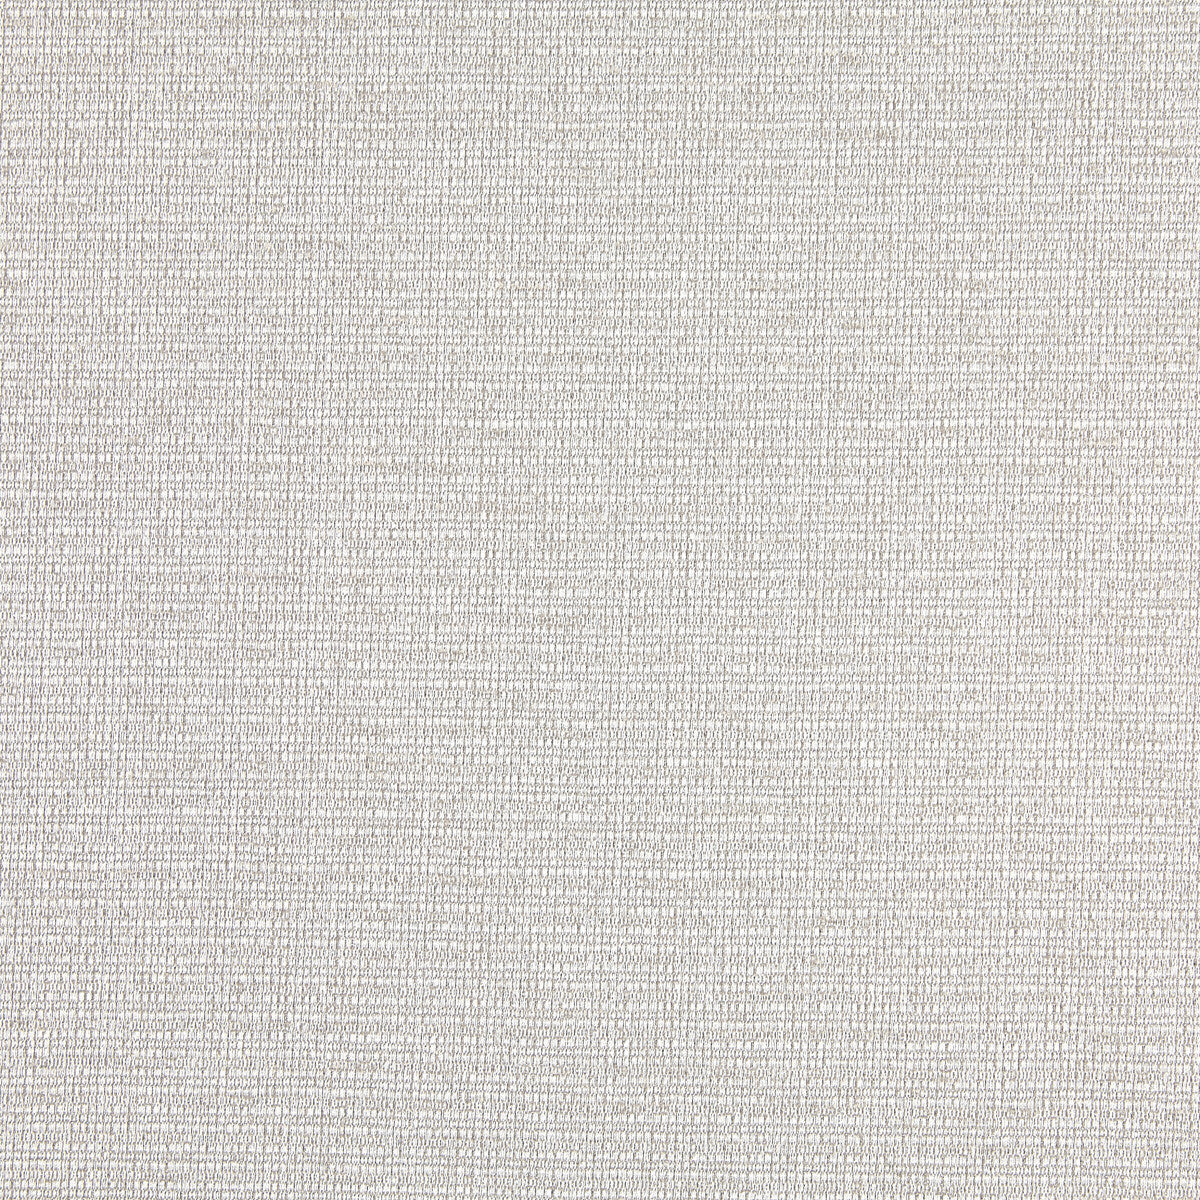 Shelley fabric in 7 color - pattern LZ-30365.07.0 - by Kravet Design in the Lizzo collection